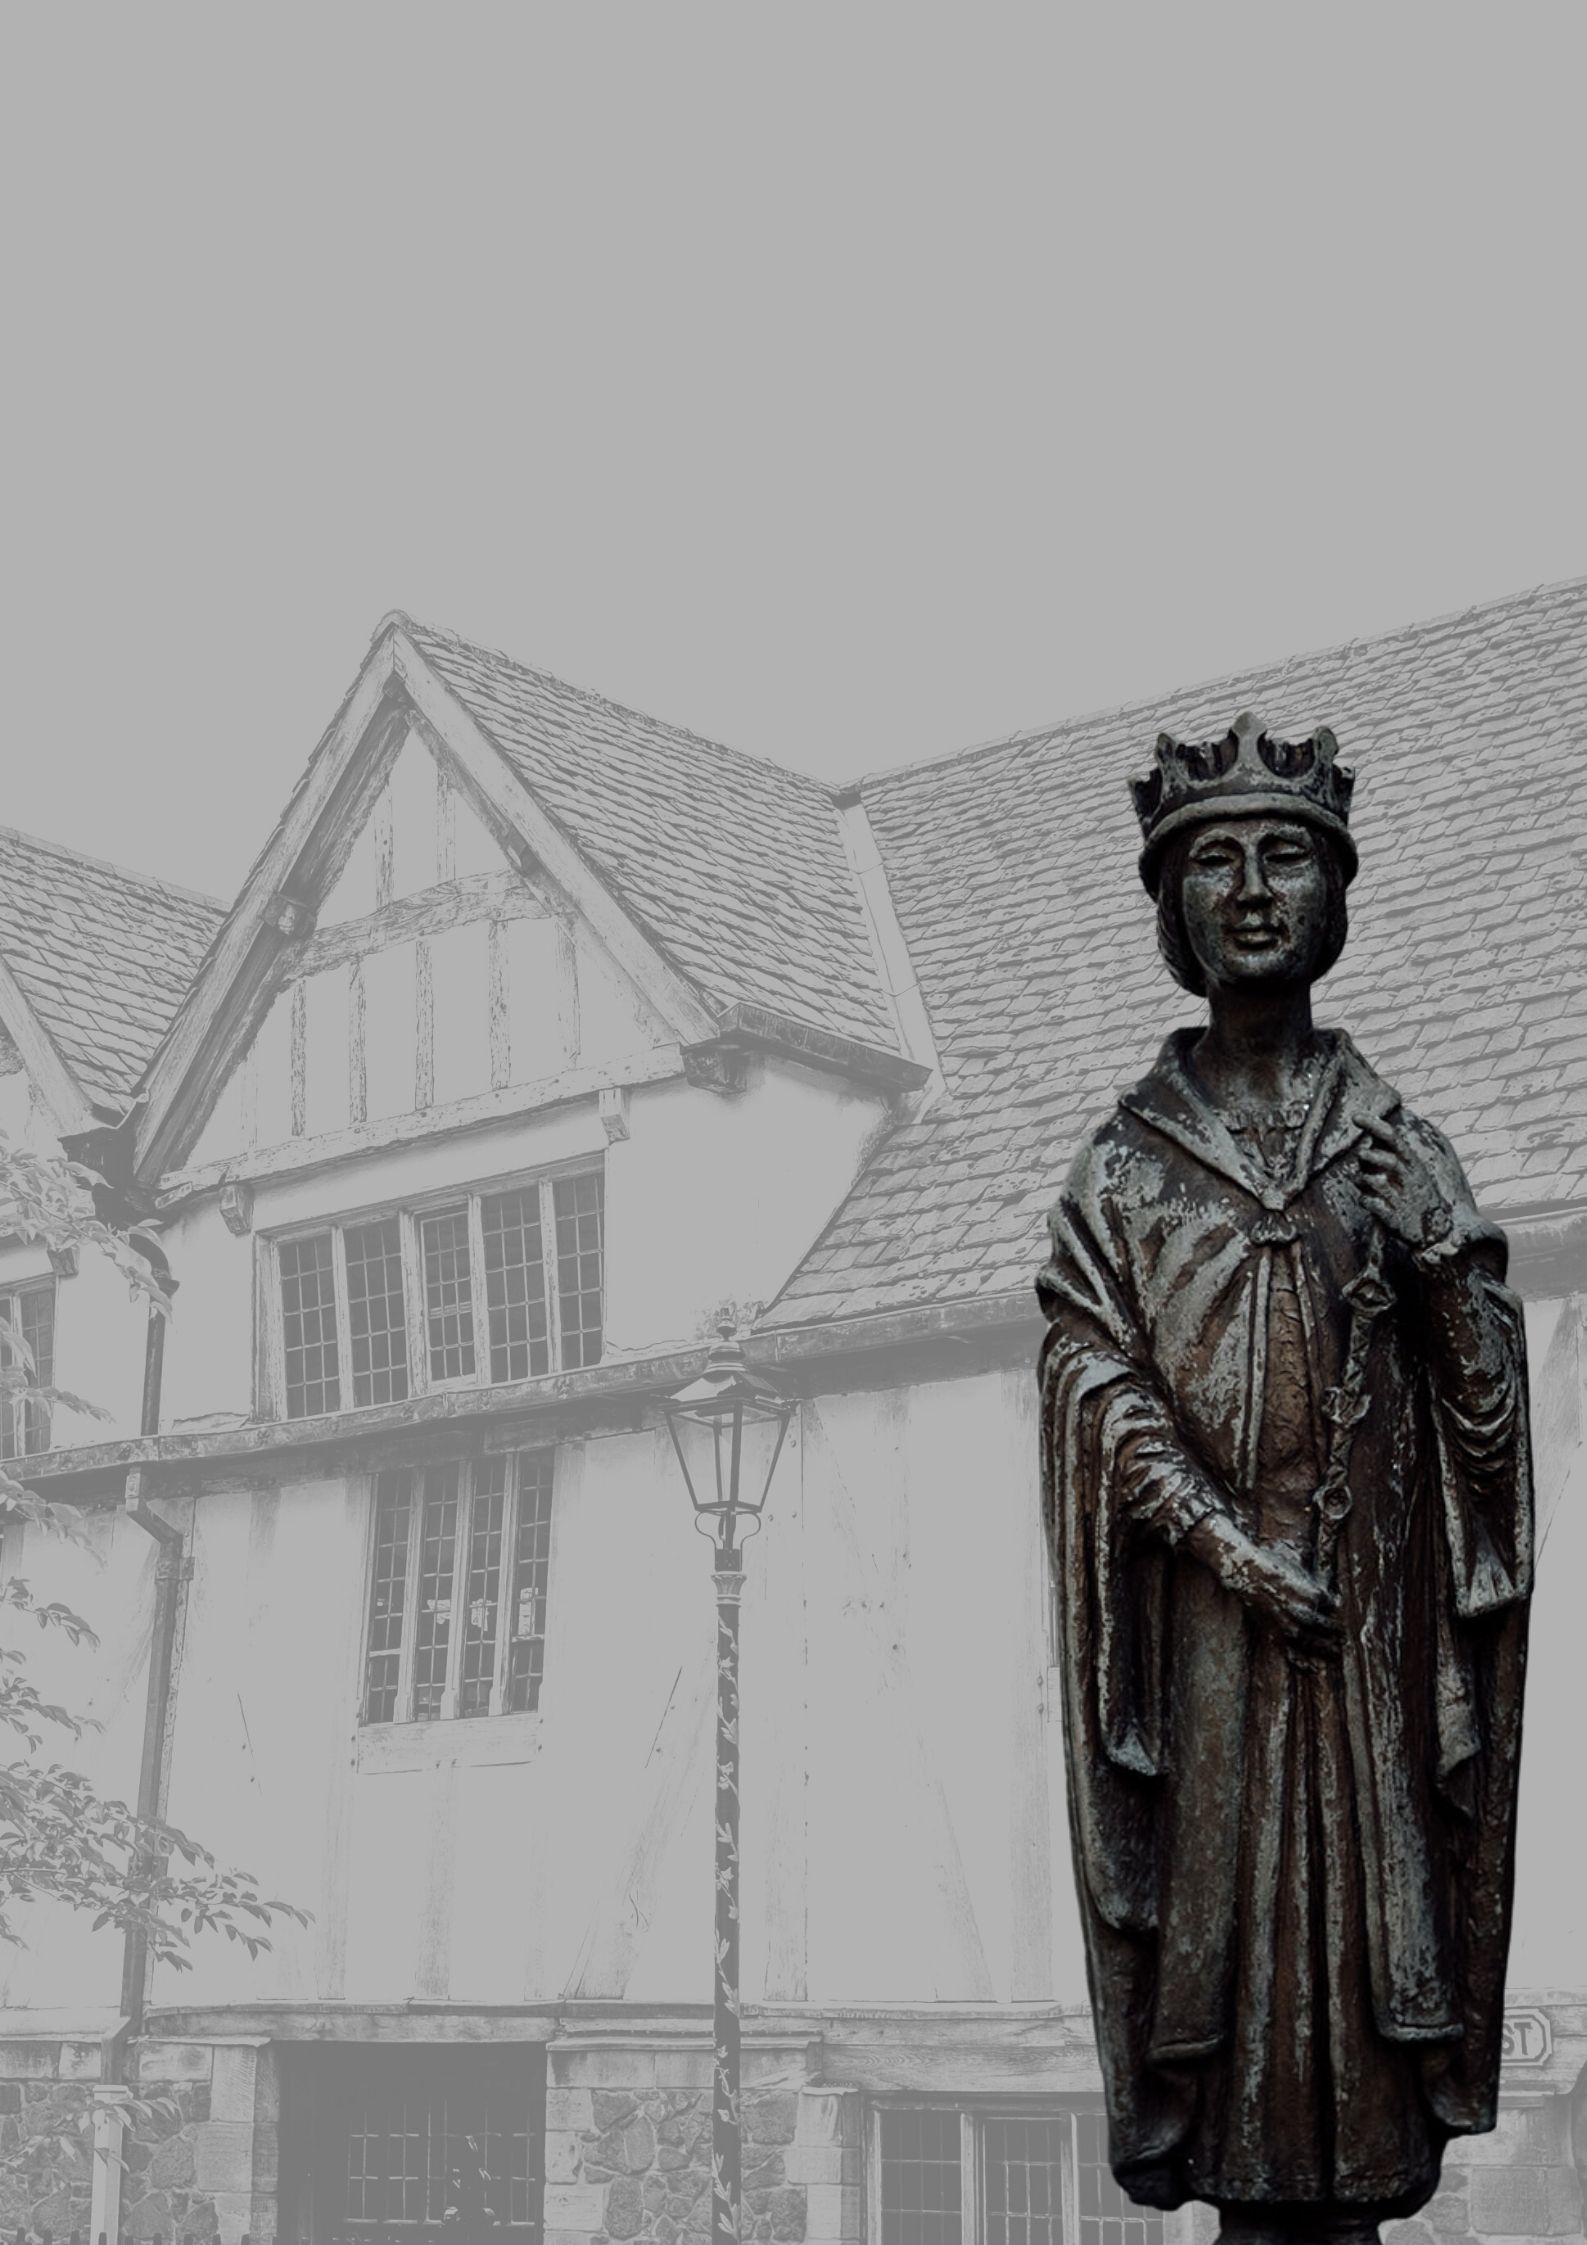 Group Walk: On the trail of Lady Aethelflaed